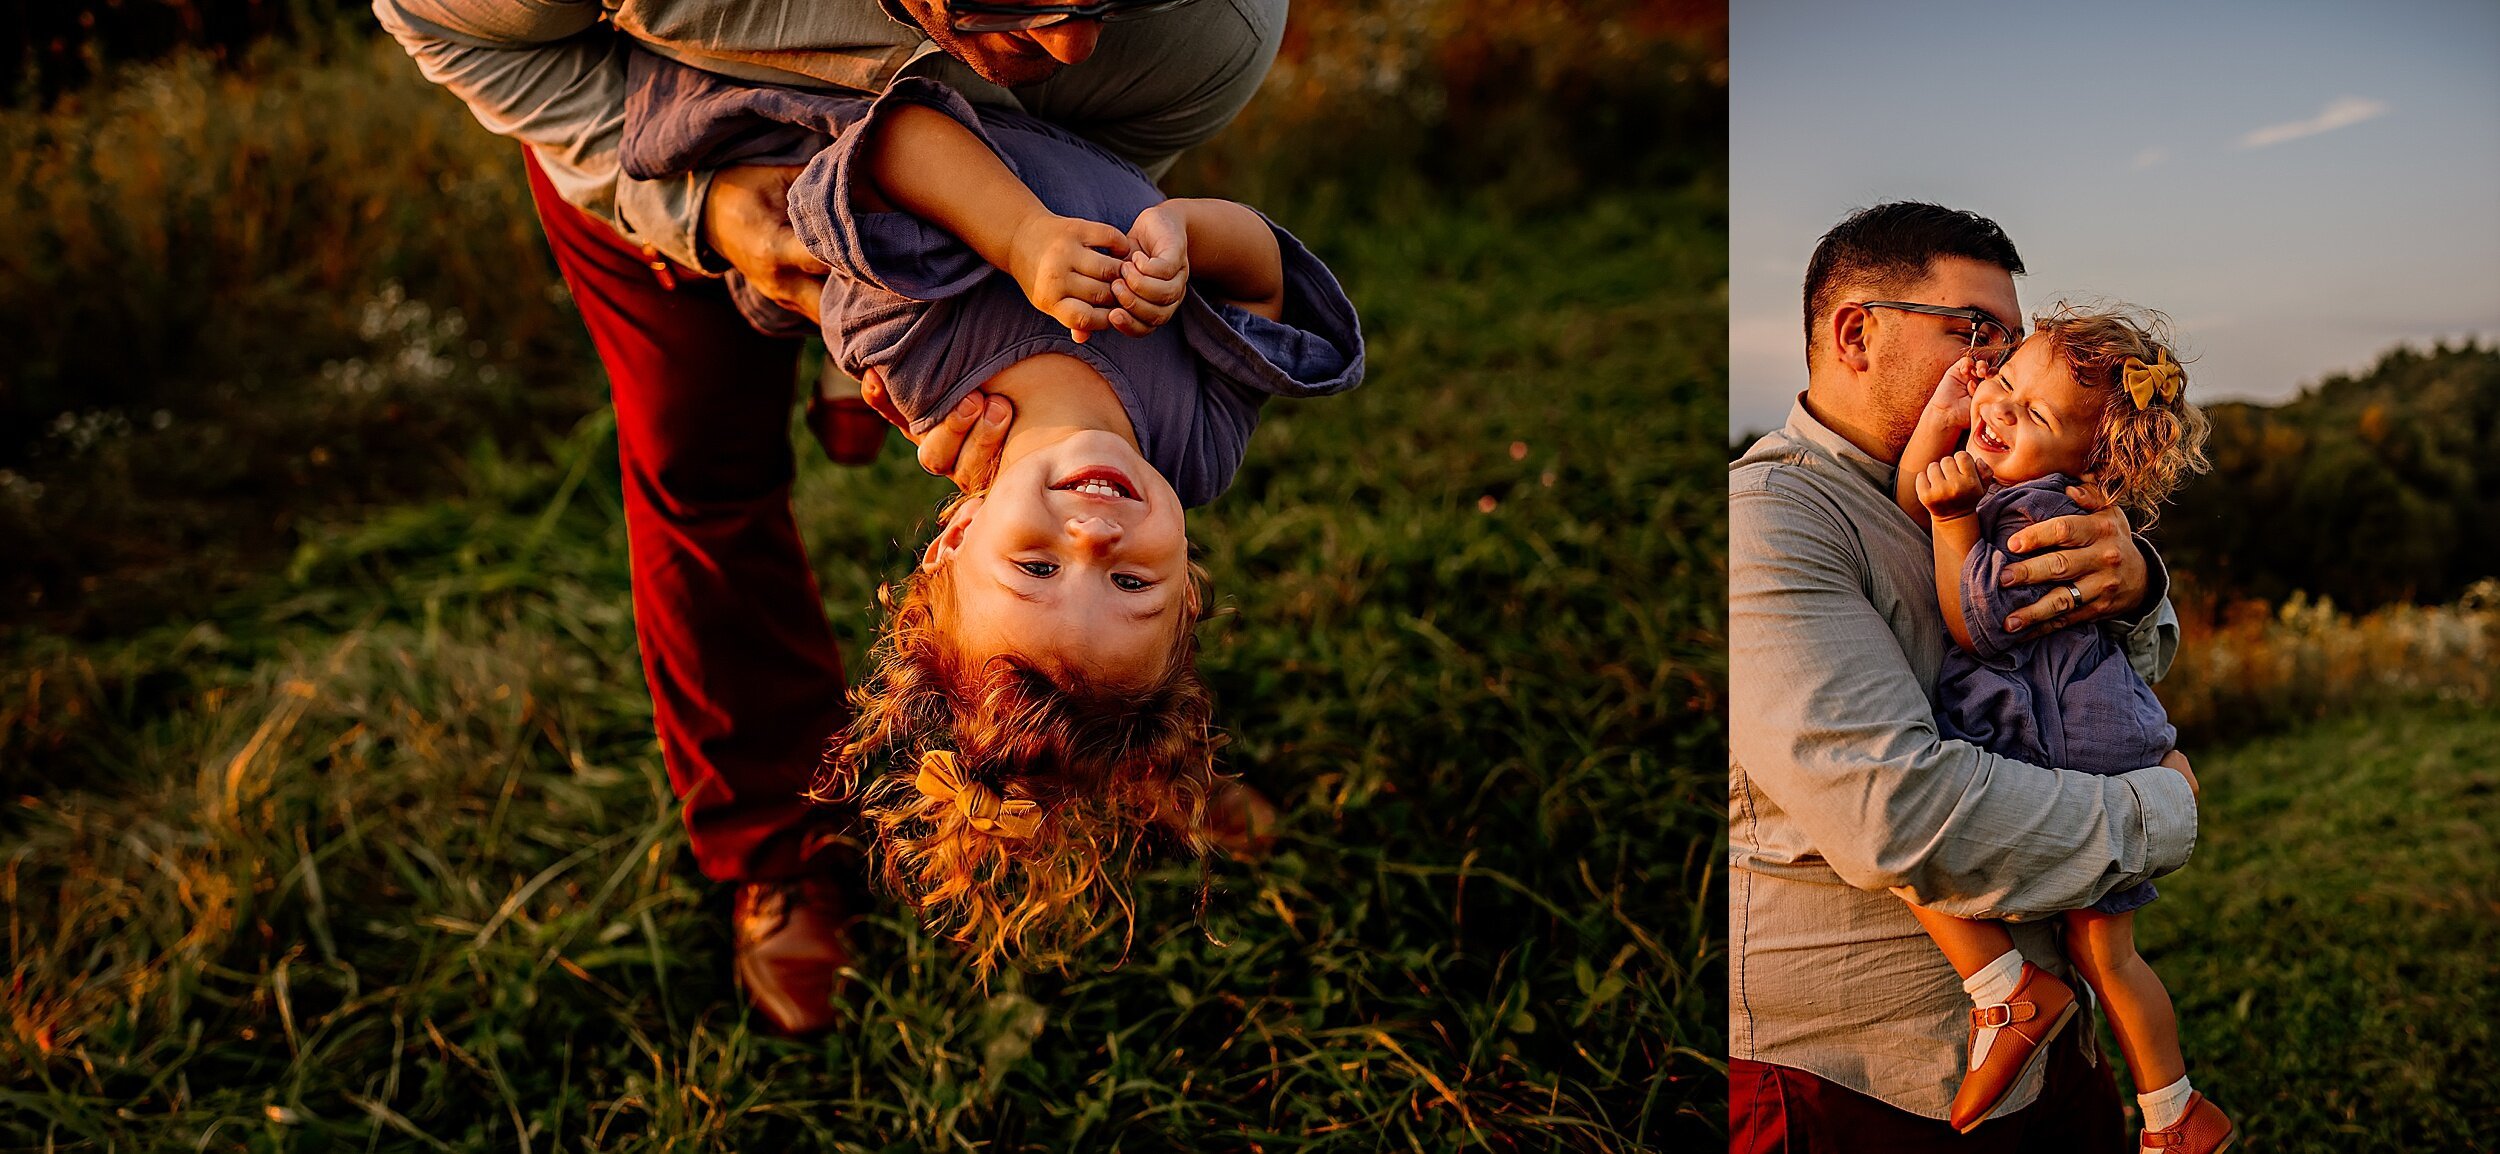 akron-ohio-family-photography-session-summer-sunset-outdoors-with-photographer-lauren-grayson_0304.jpeg